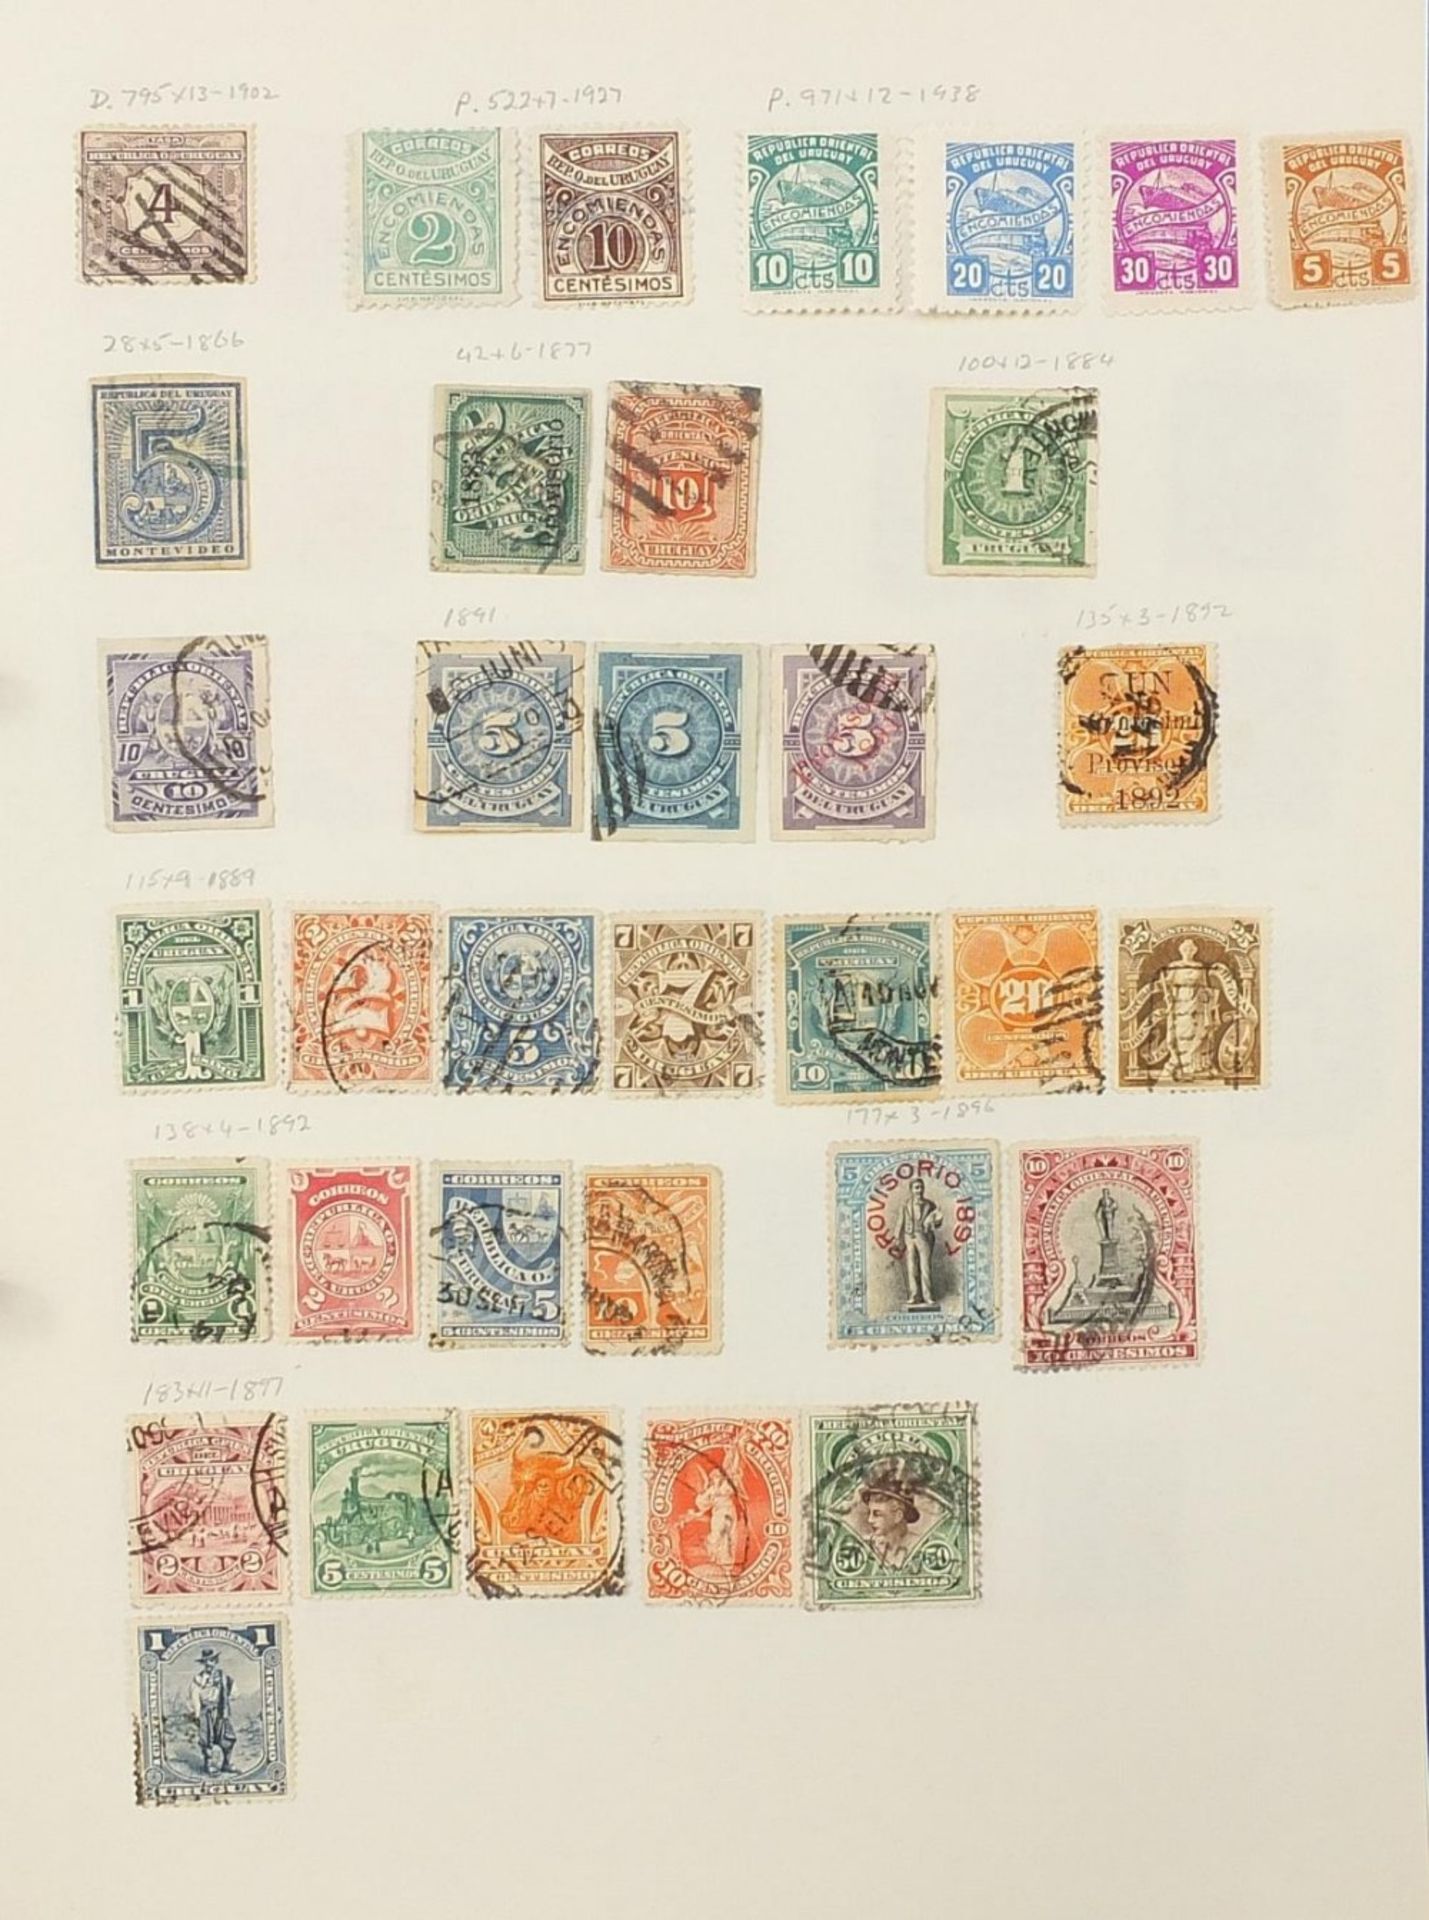 Extensive collection of antique and later world stamps arranged in albums including Brazil, - Image 32 of 52